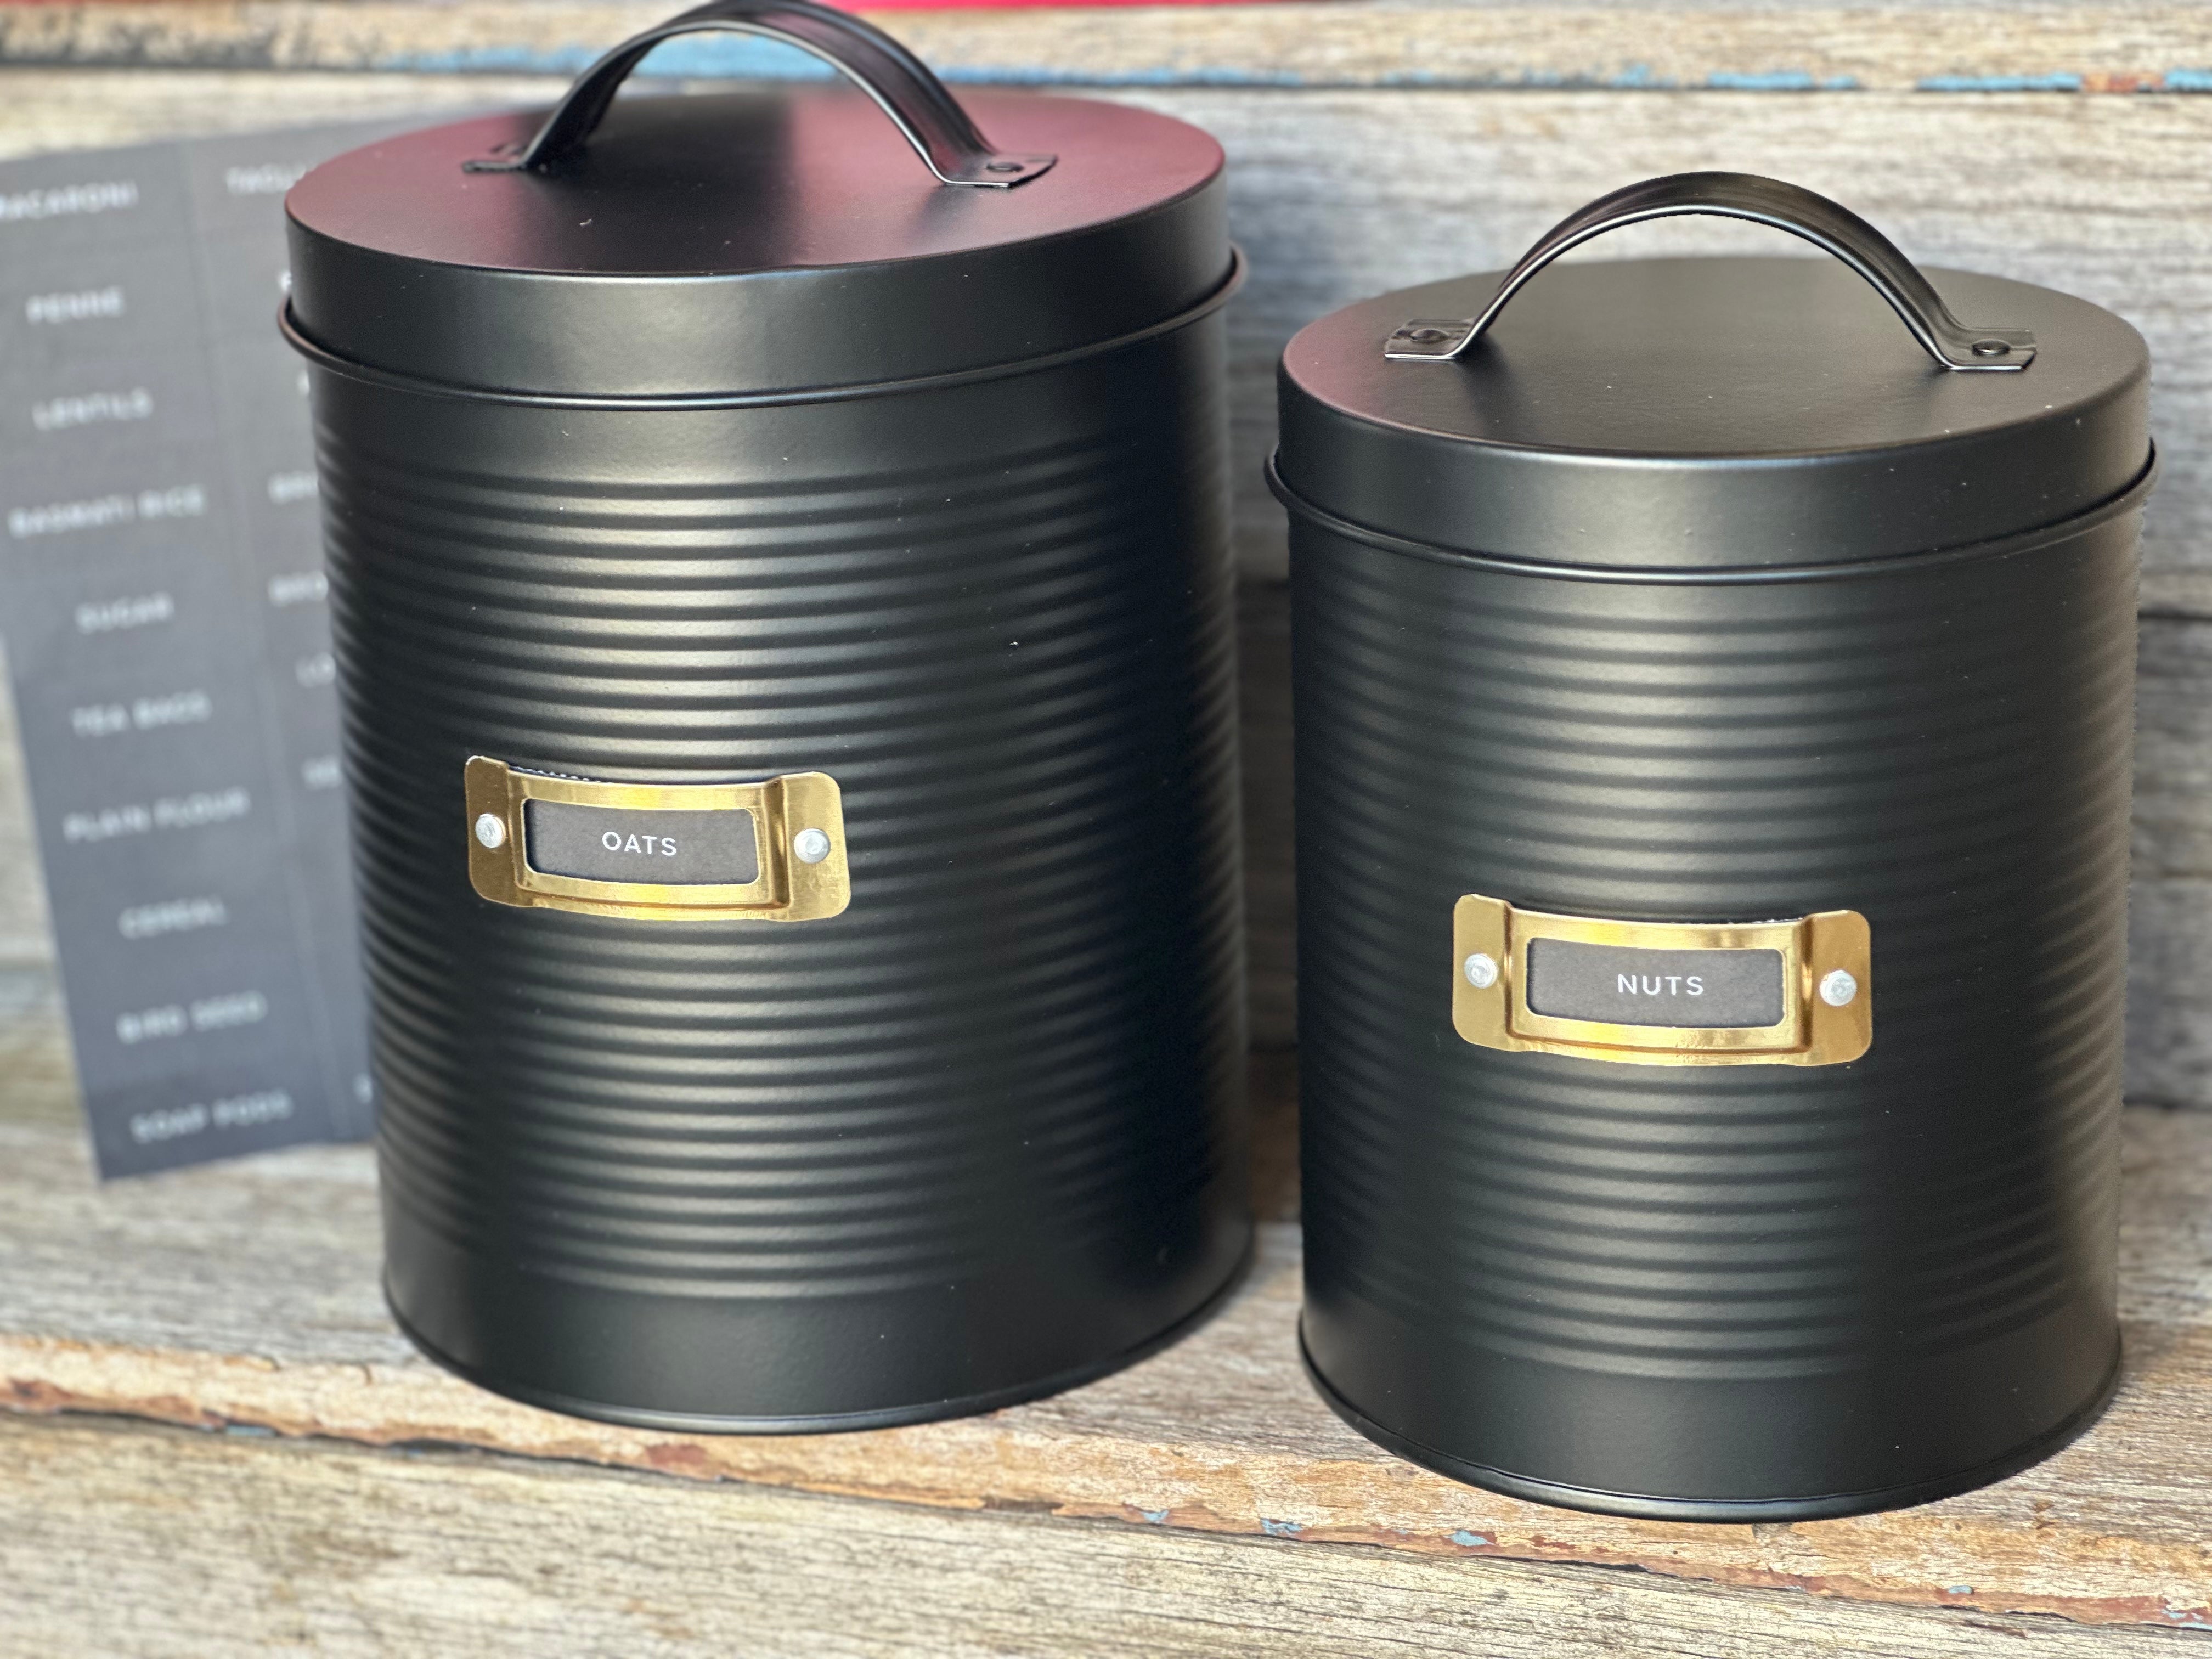 NEW Typhoon Black Canister Set with Labels